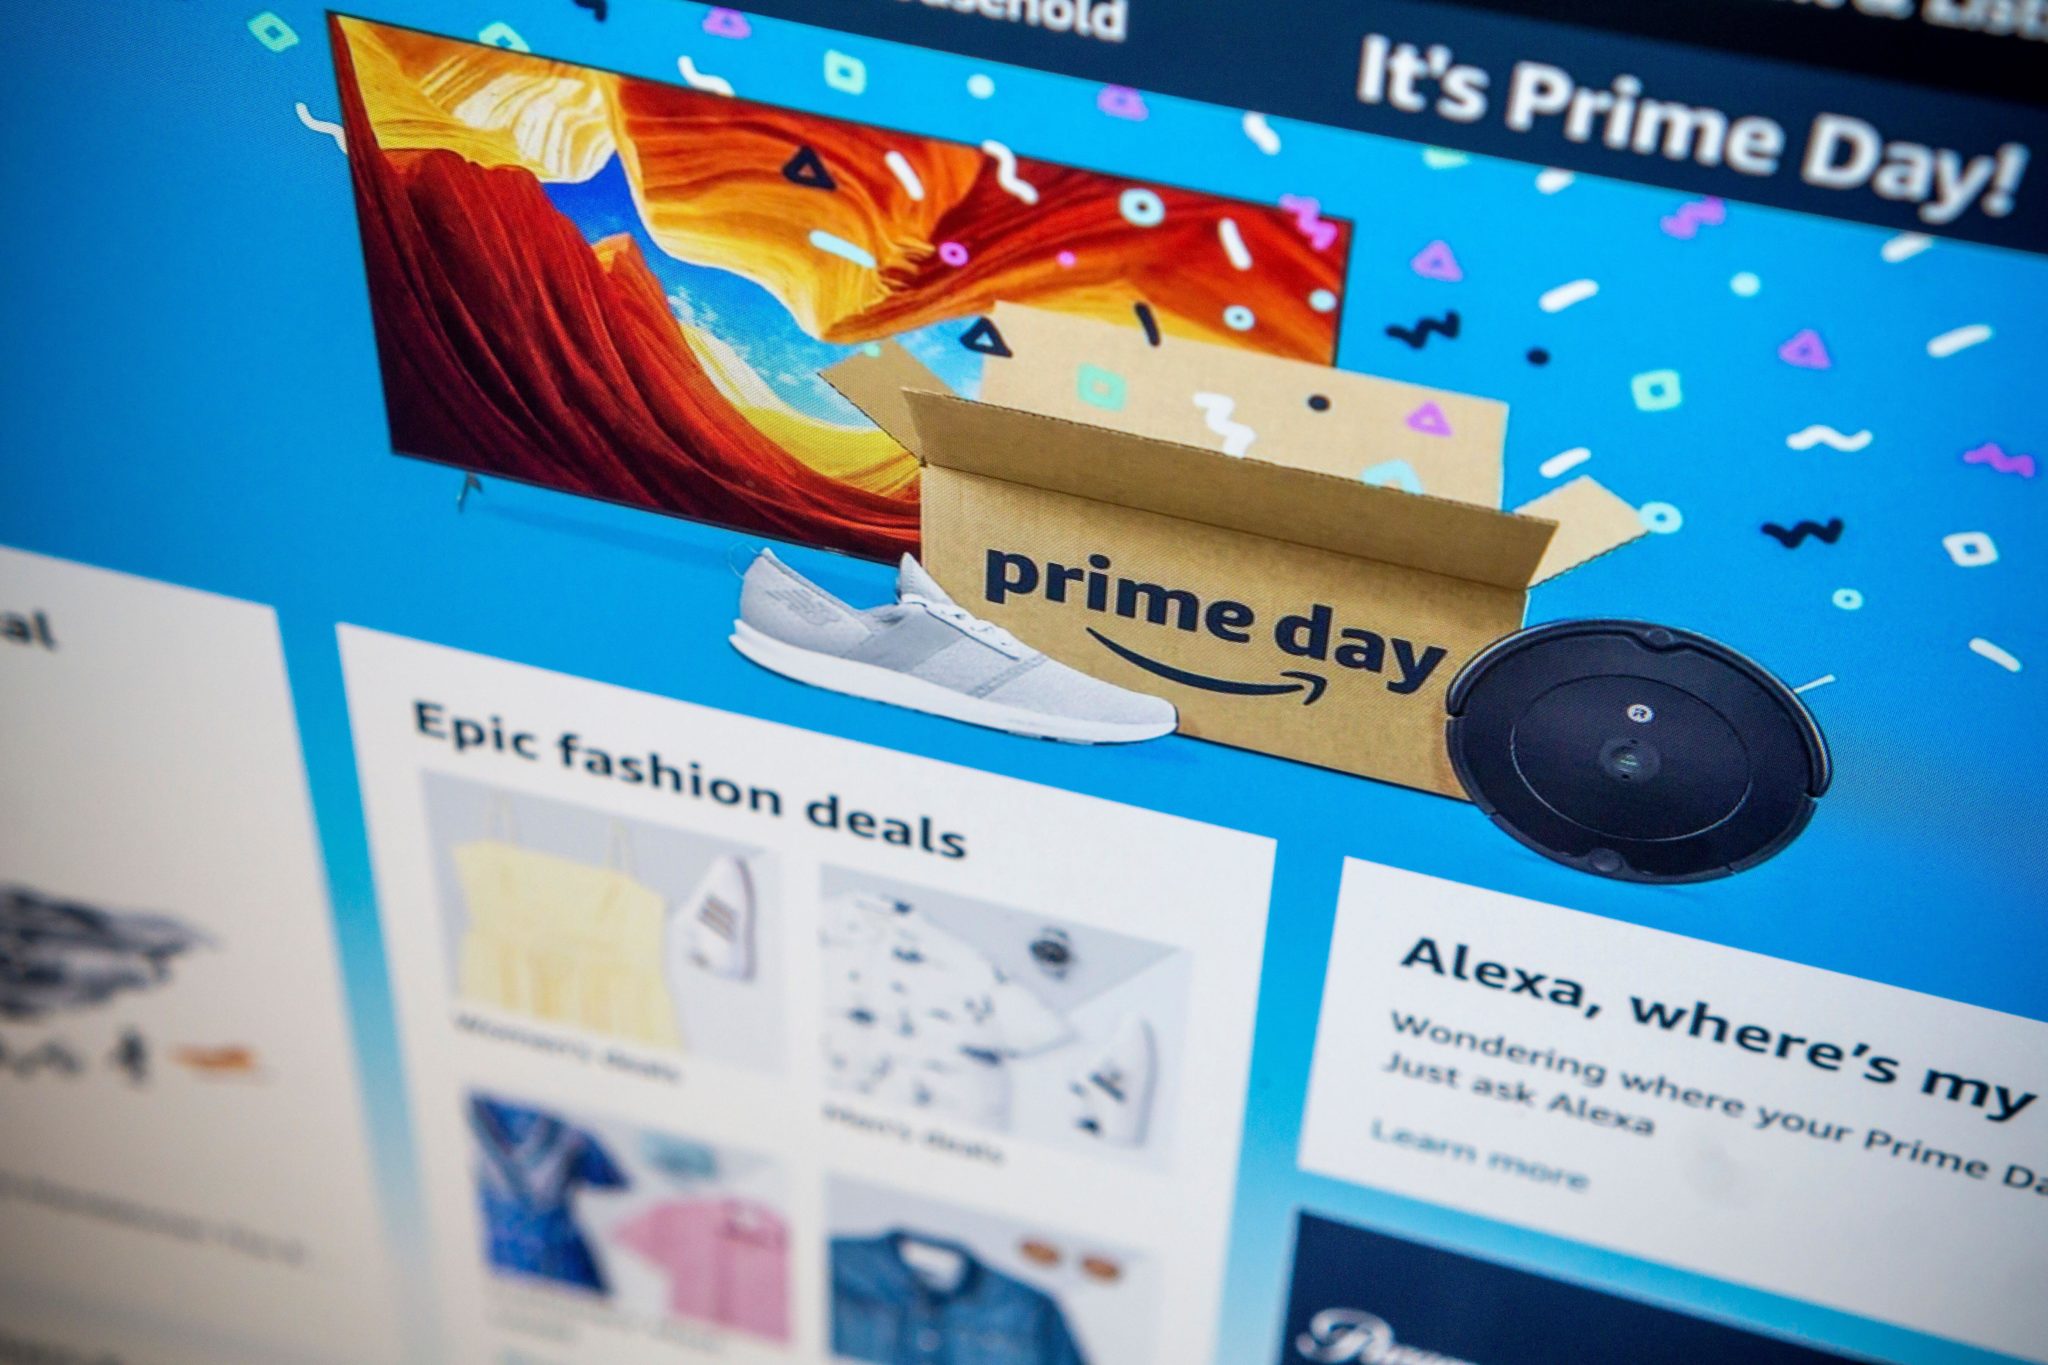  An Amazon website promotes 'Prime Day' in June 2021